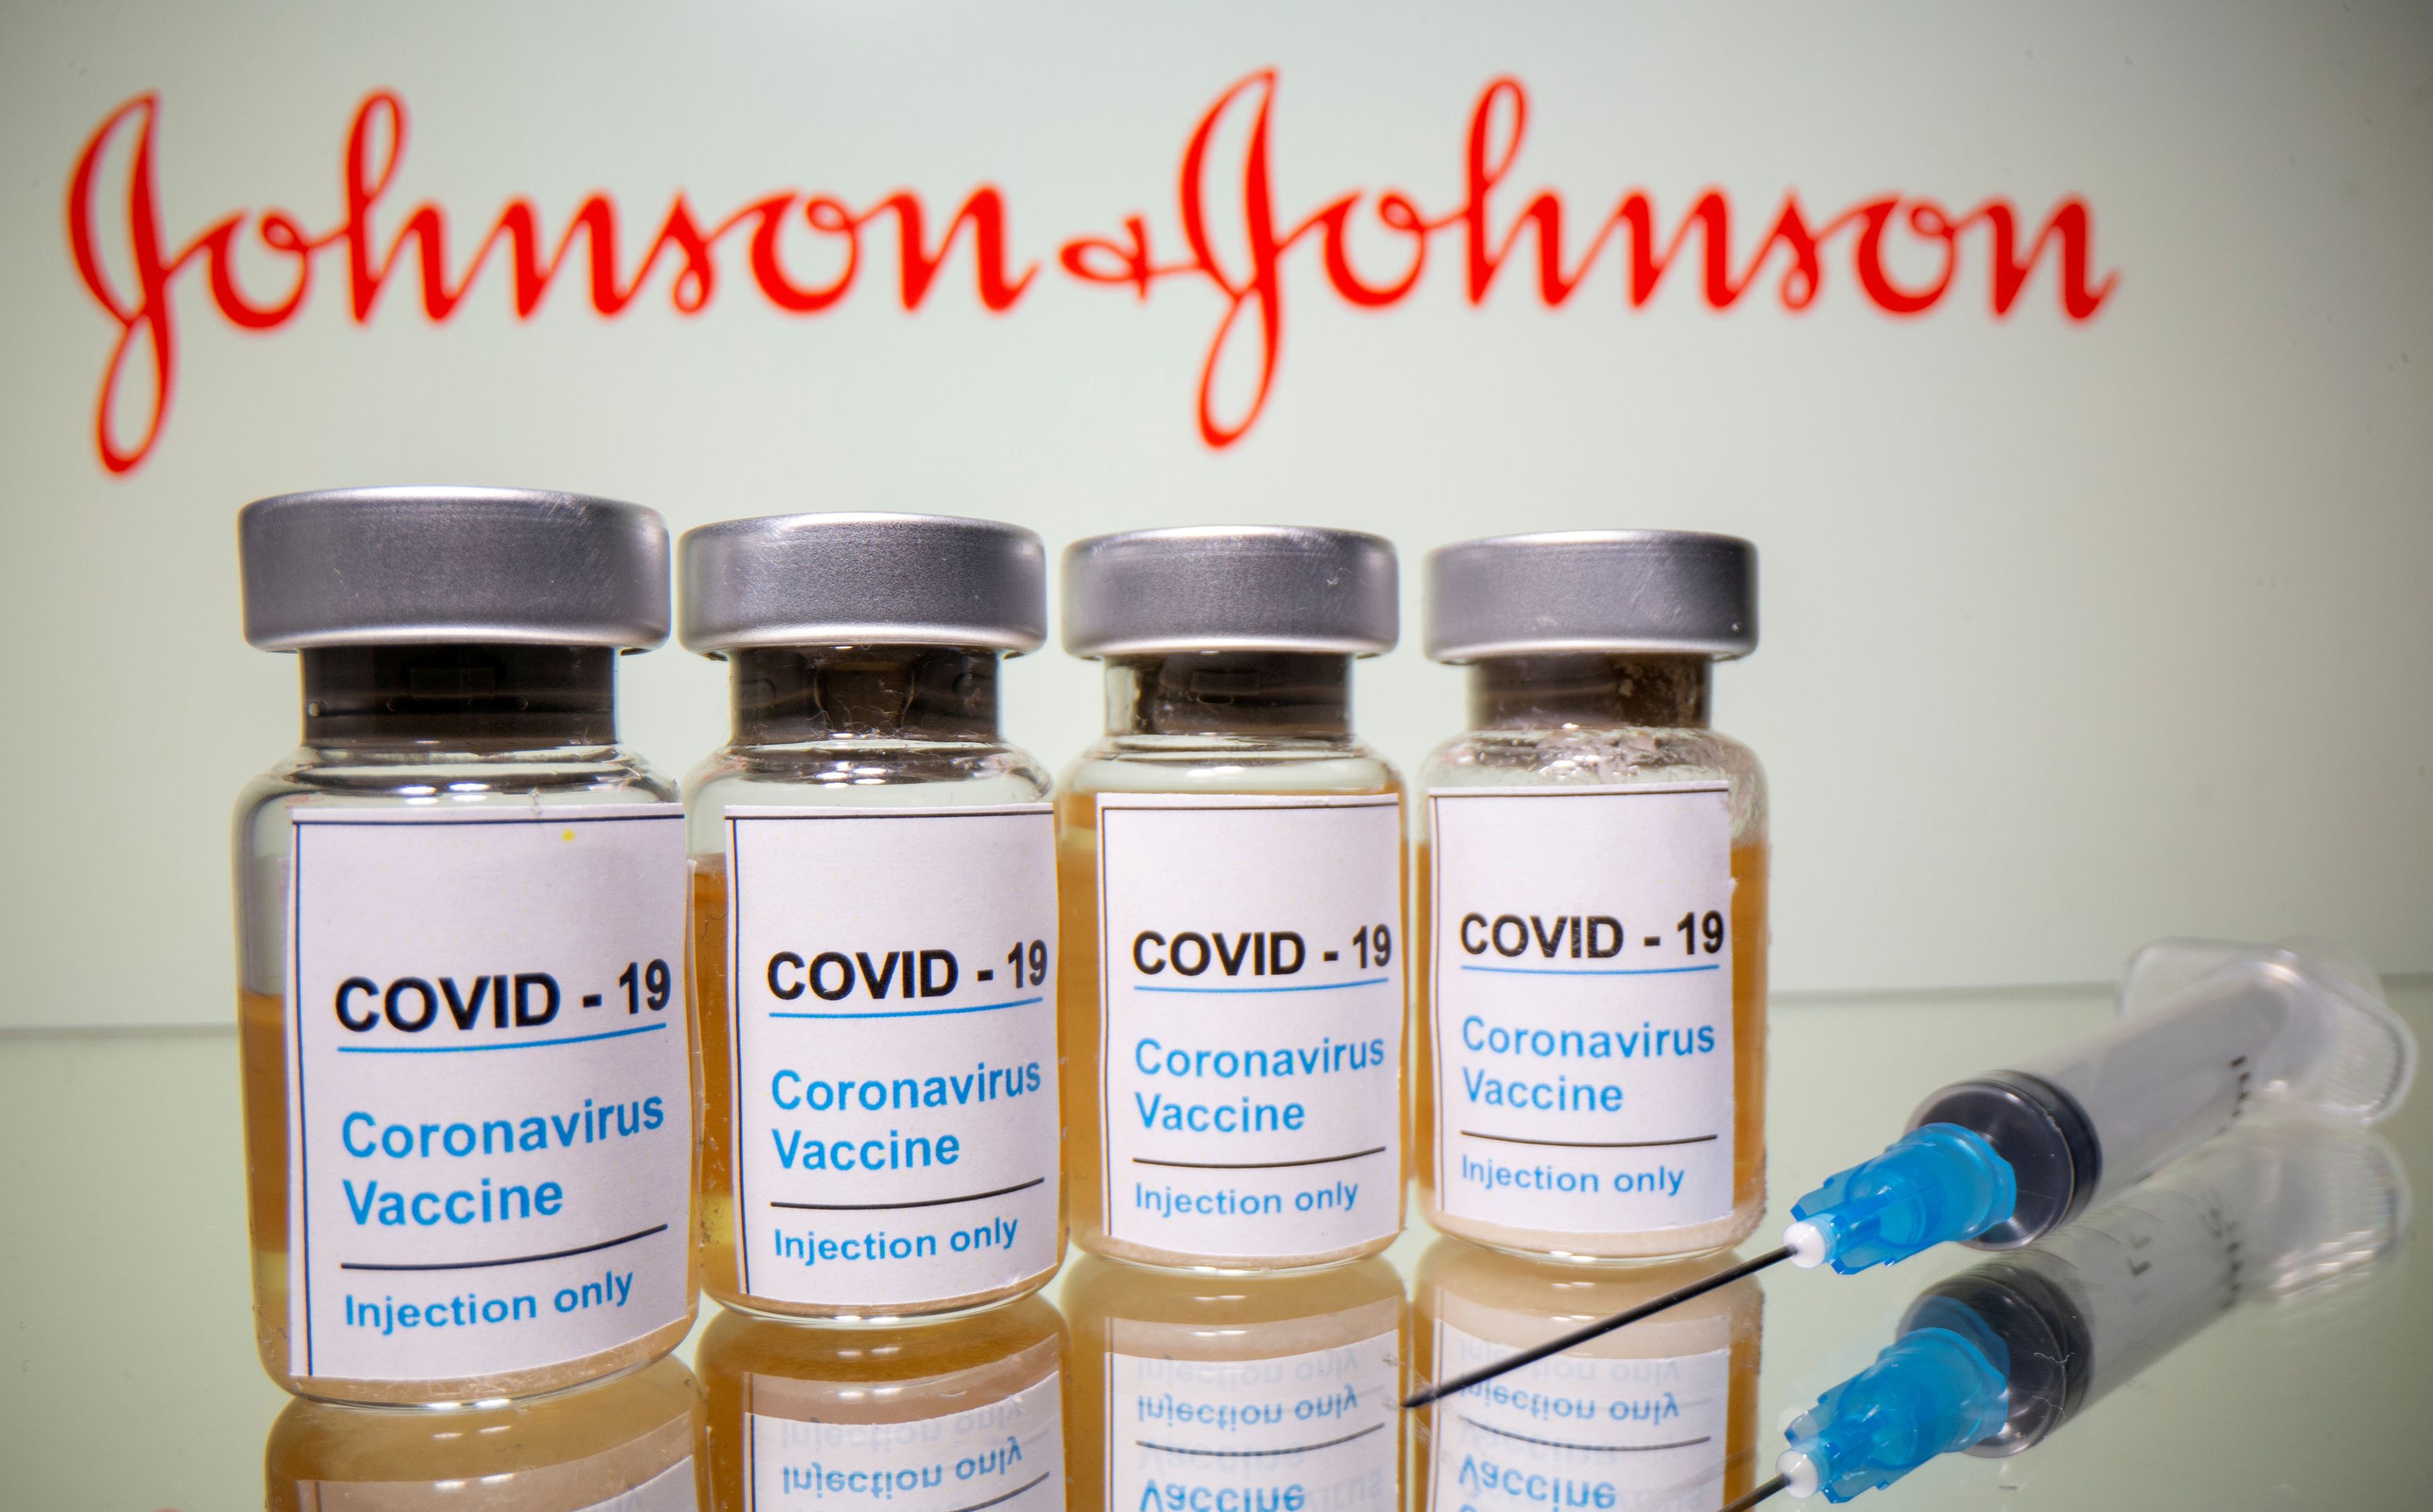 Johnson & Johnson, covid-19 vaccine, South Africa, vaccine production agreement, transparency